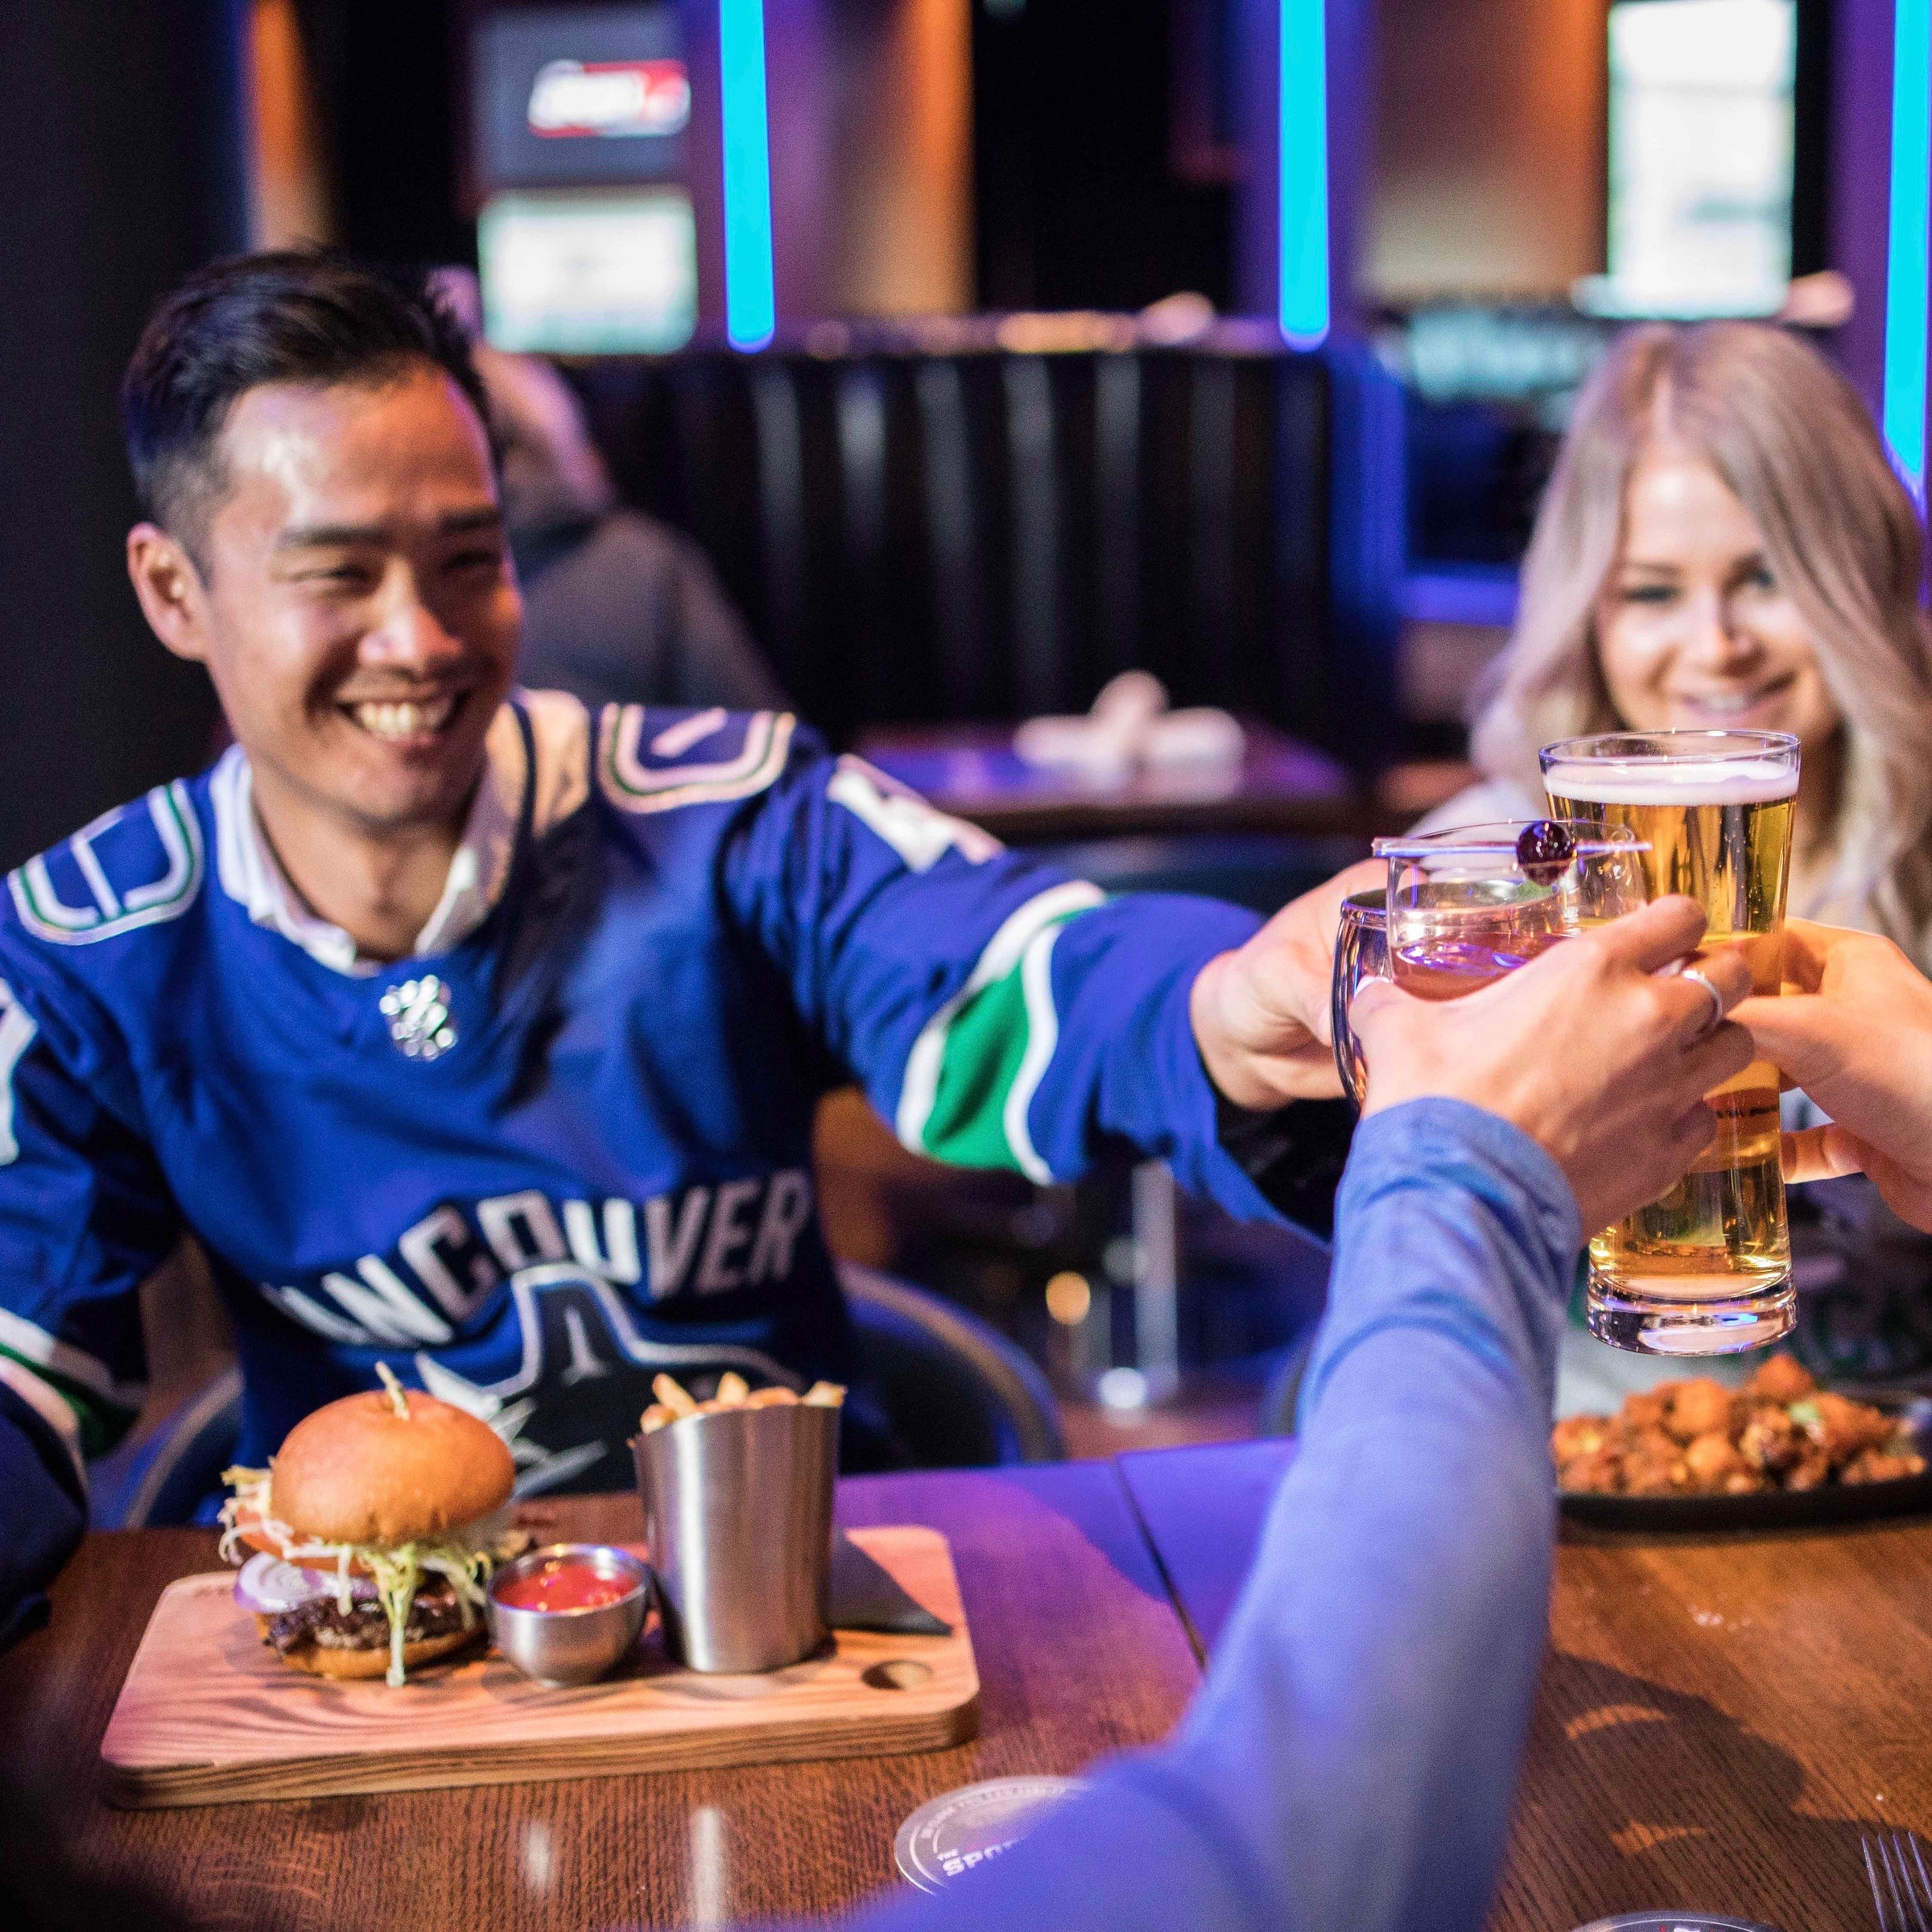 Top 15 Vancouver Canucks Sports Bars - Accidental Travel Writer